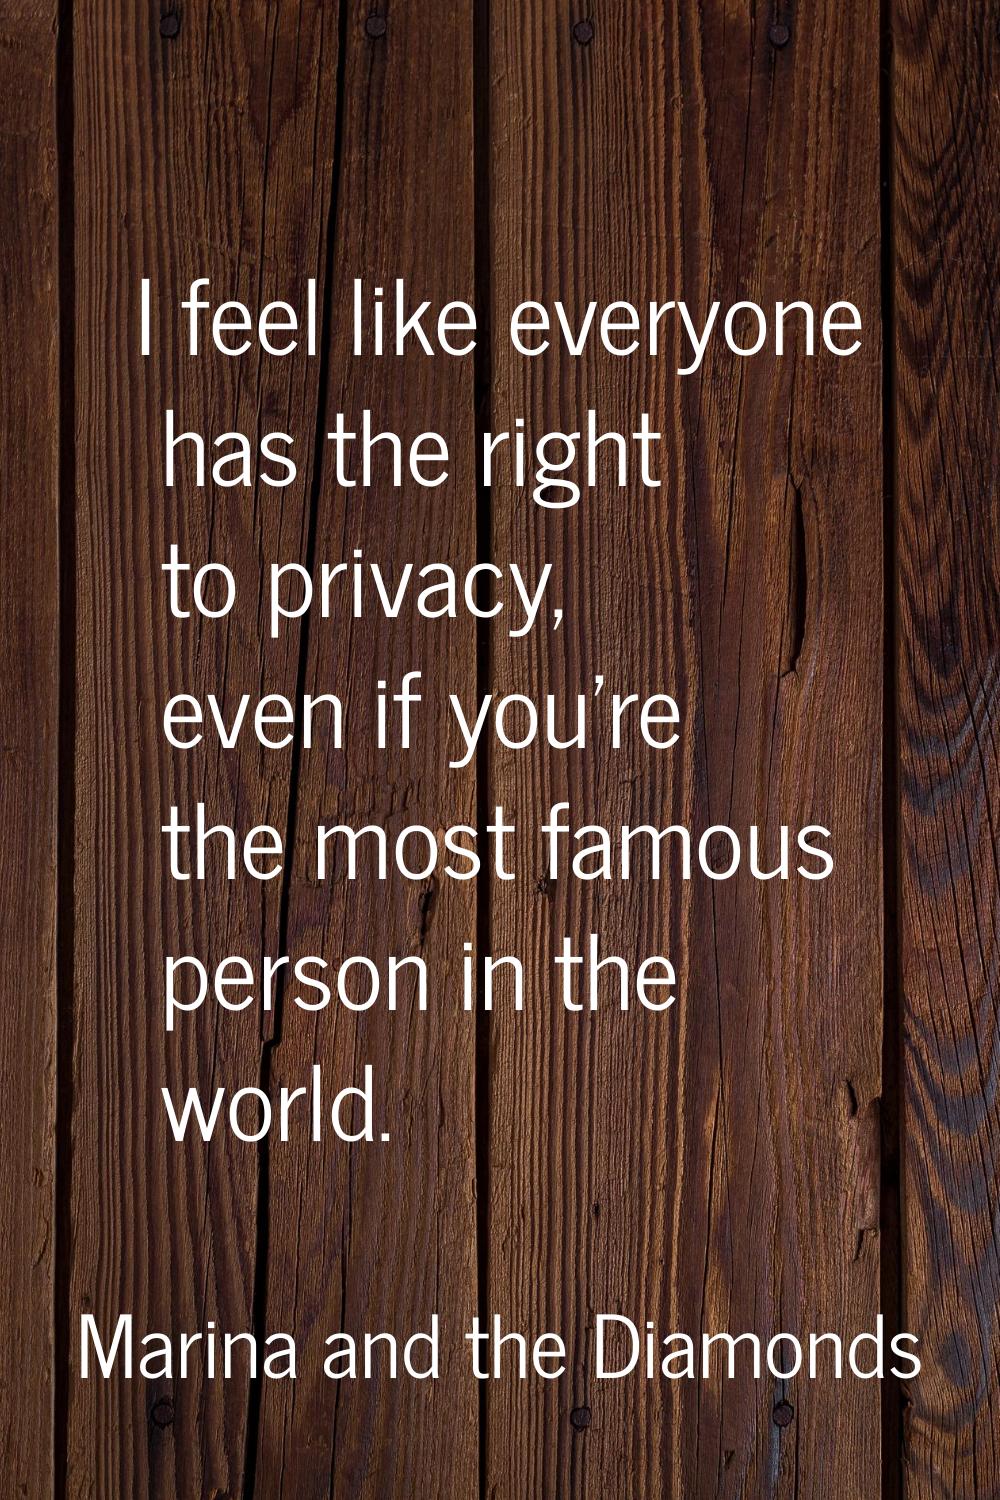 I feel like everyone has the right to privacy, even if you're the most famous person in the world.